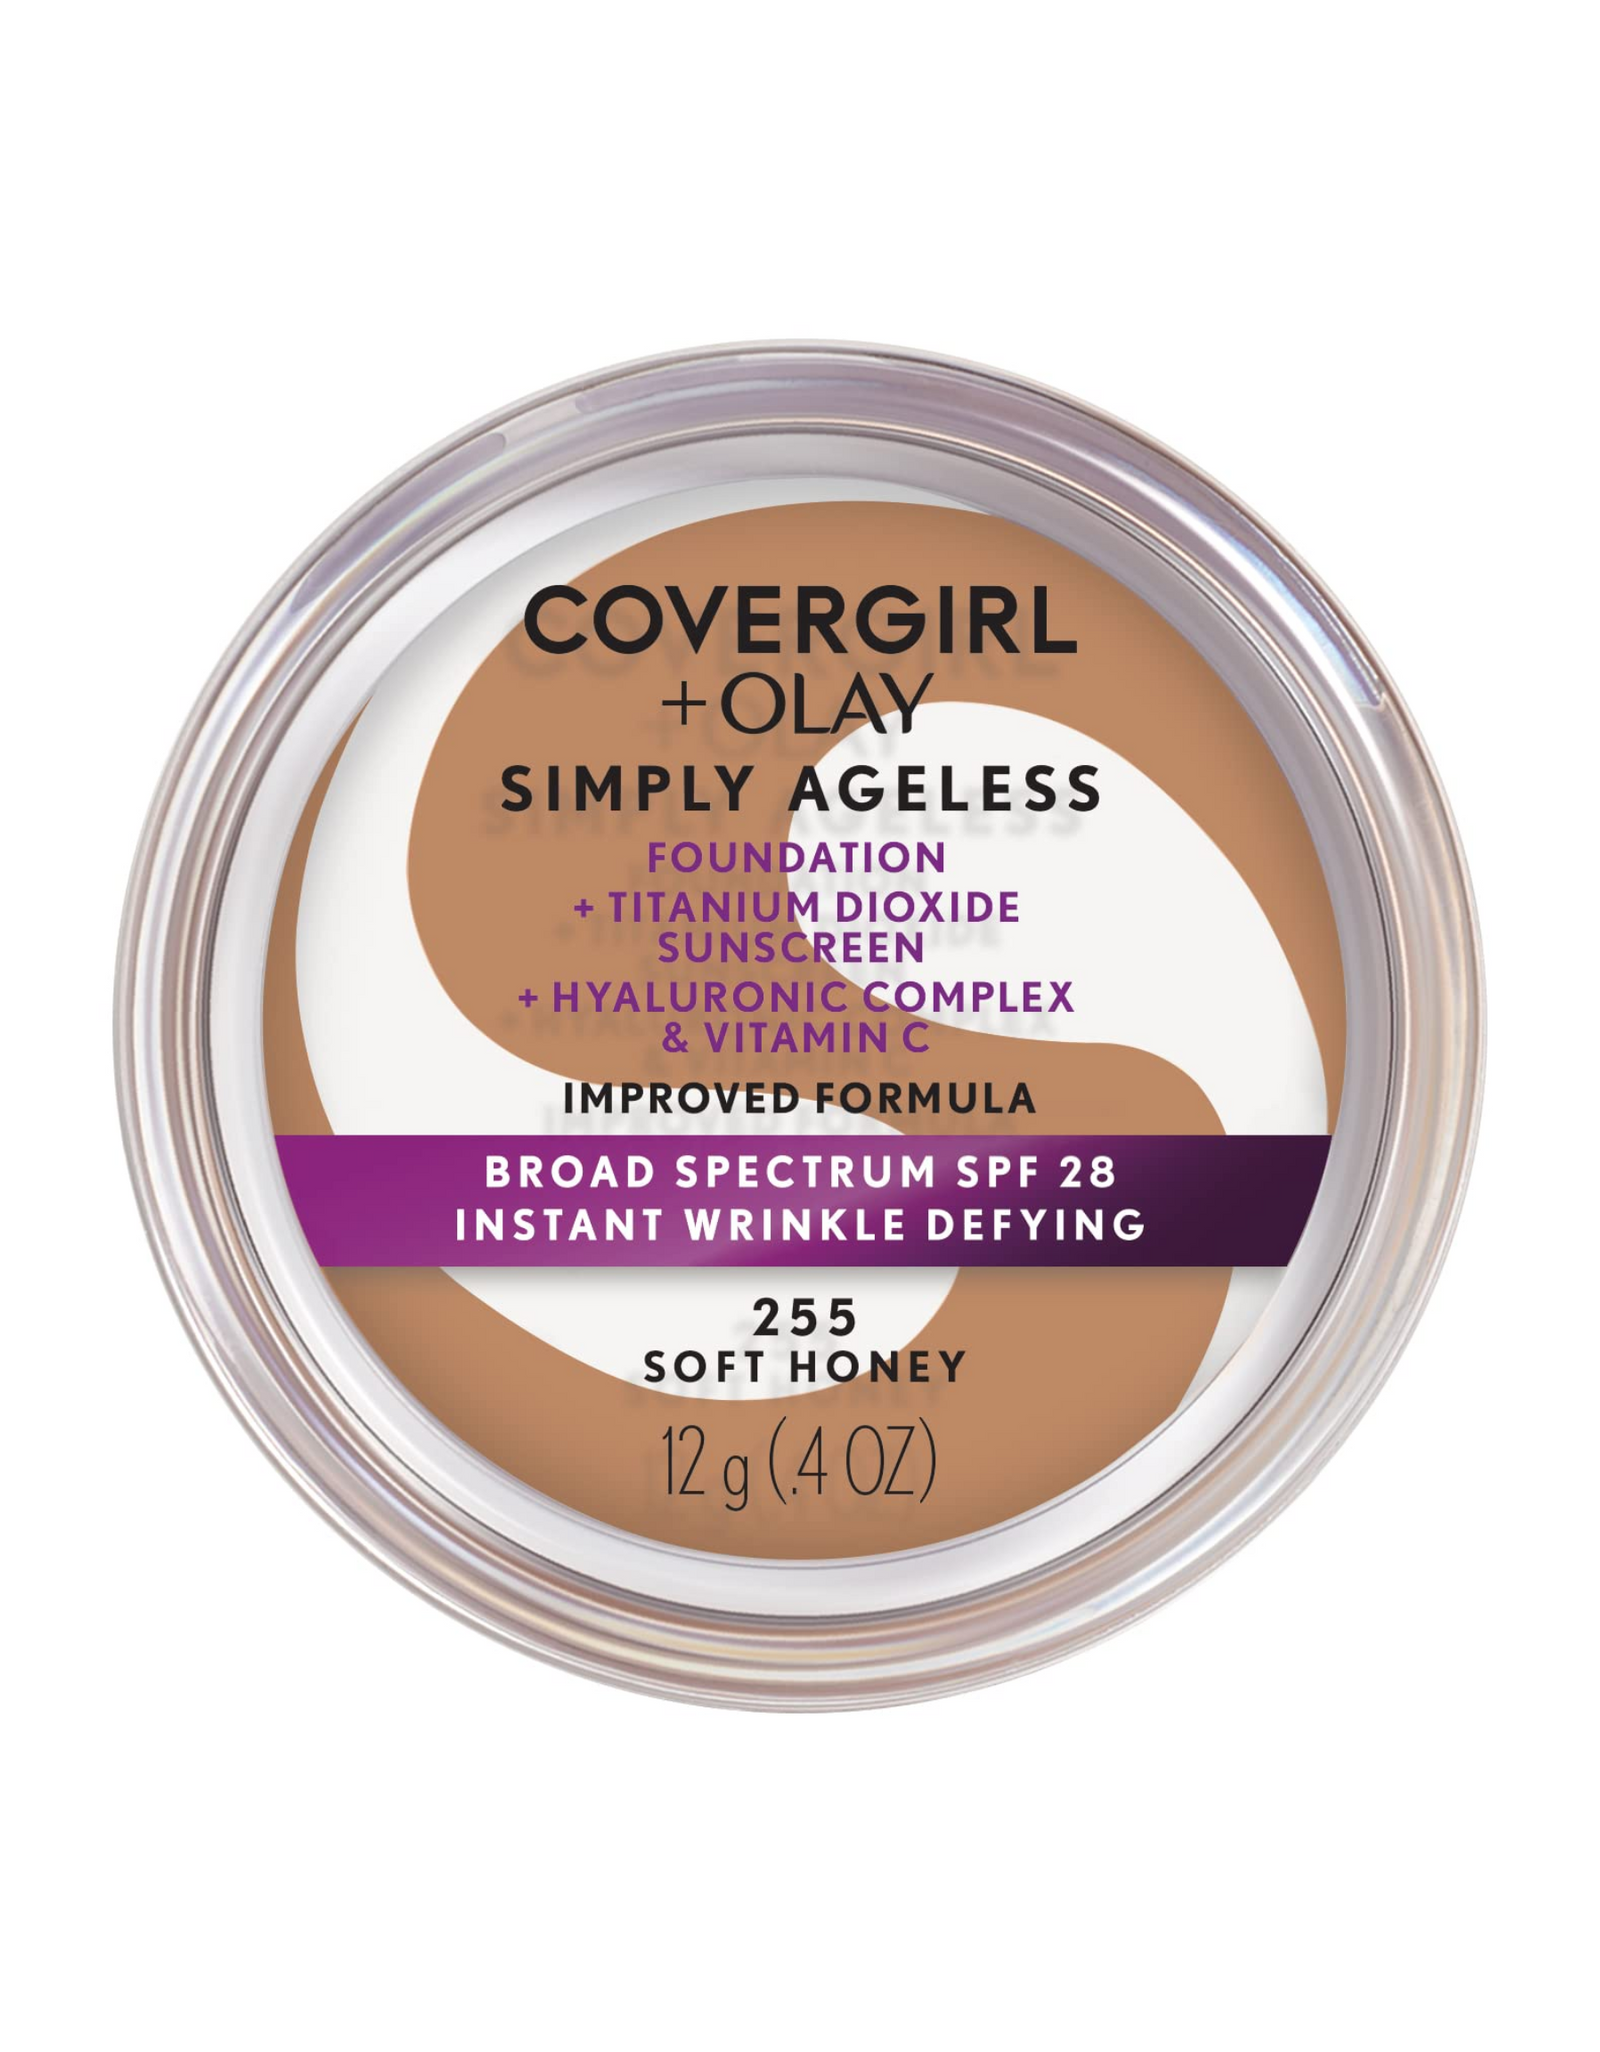 COVERGIRL & Olay Simply Ageless Foundation with Broad Spectrum SPF 28, Soft Honey, 0.44 oz